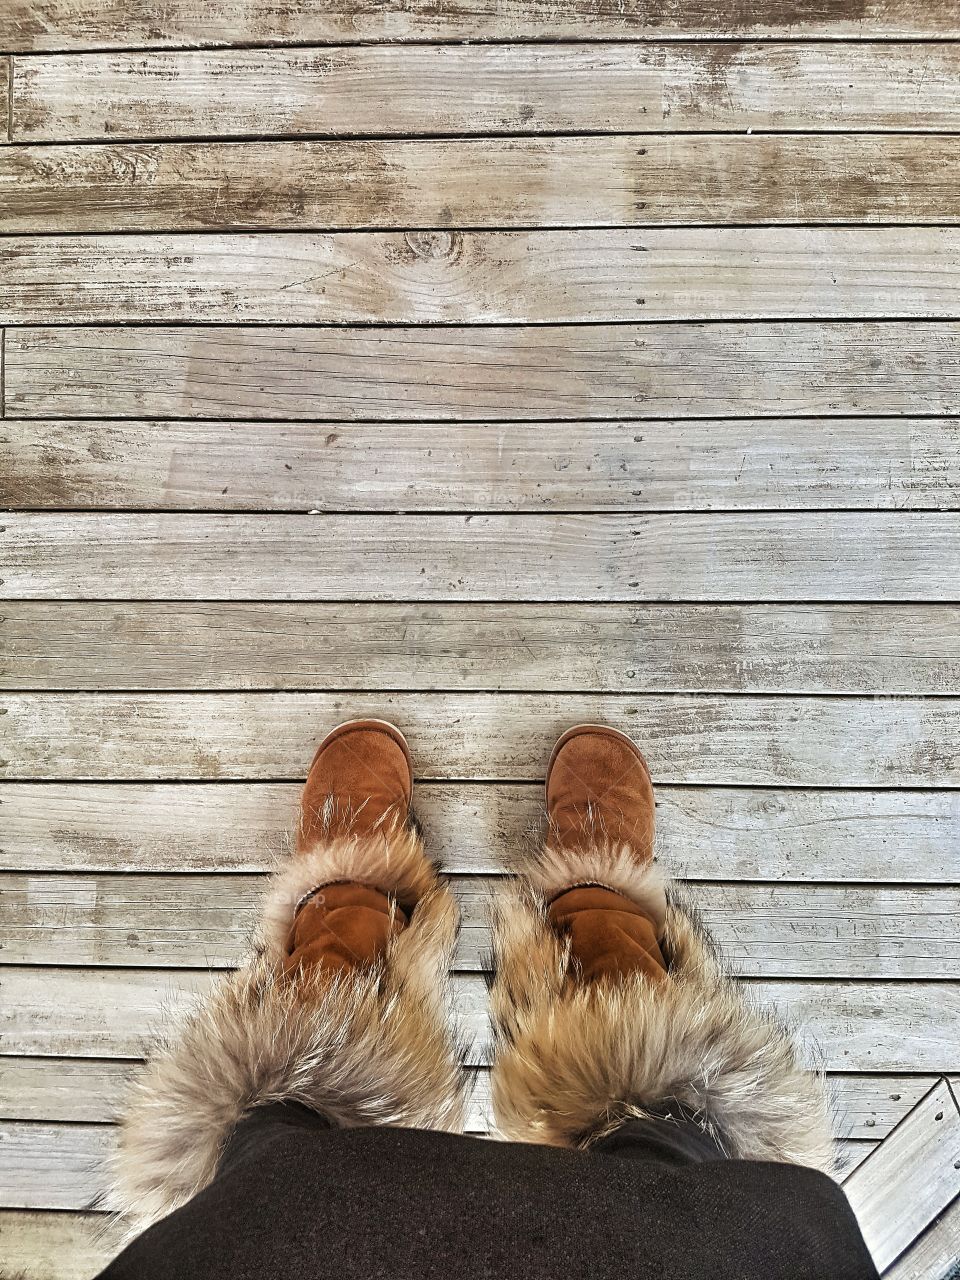 Ugg Boot slippers on wooden deck